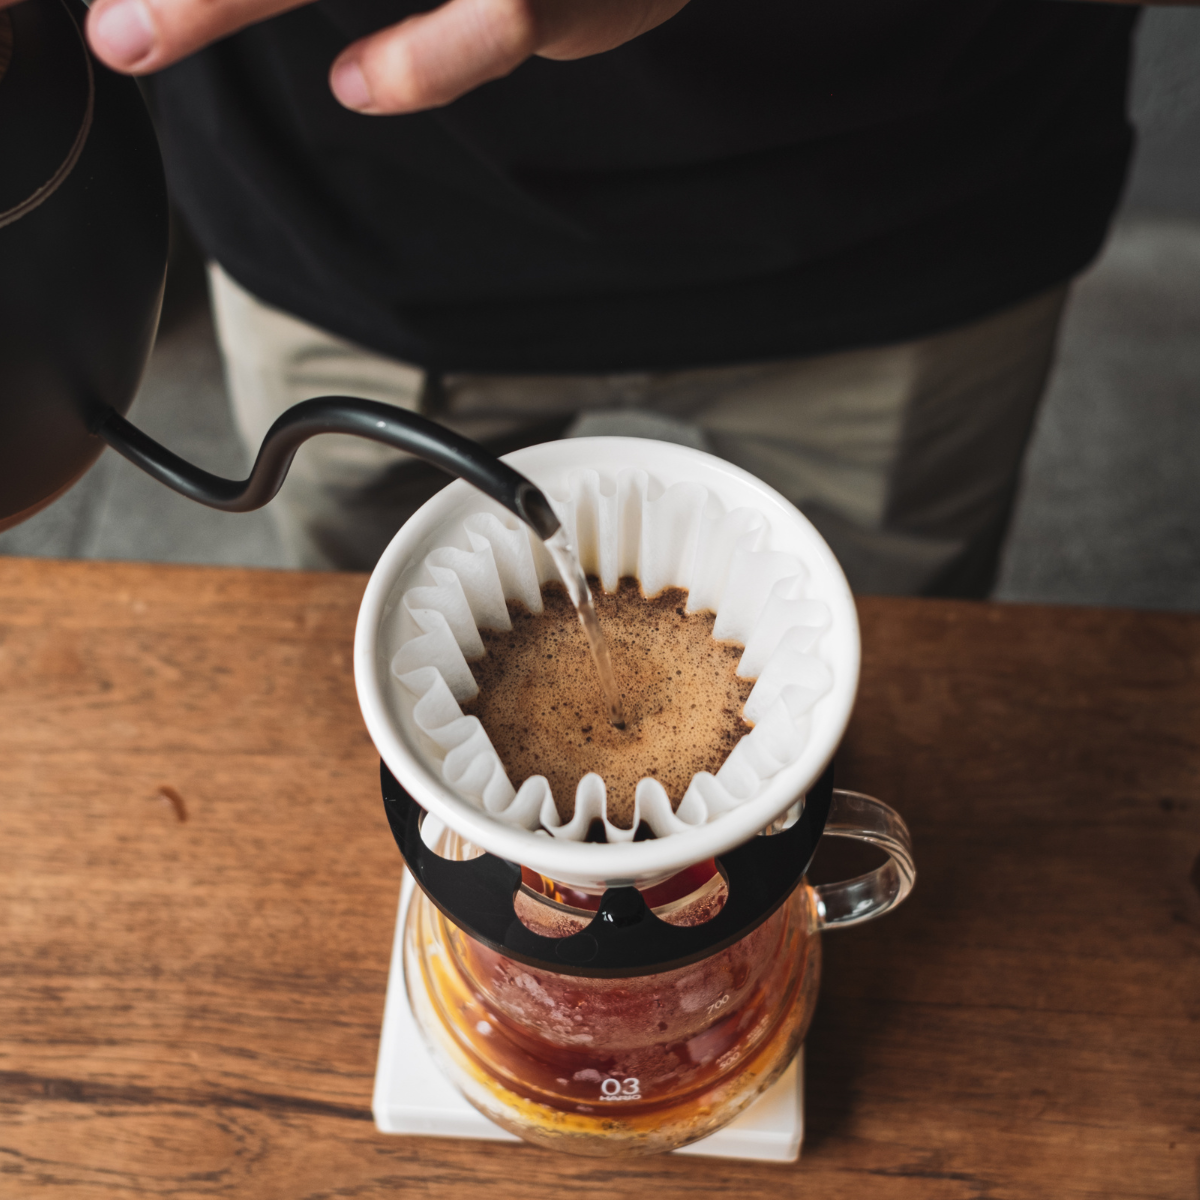 Using the manual pour-over technique consistently brings out coffee with impressive precision and clarity.